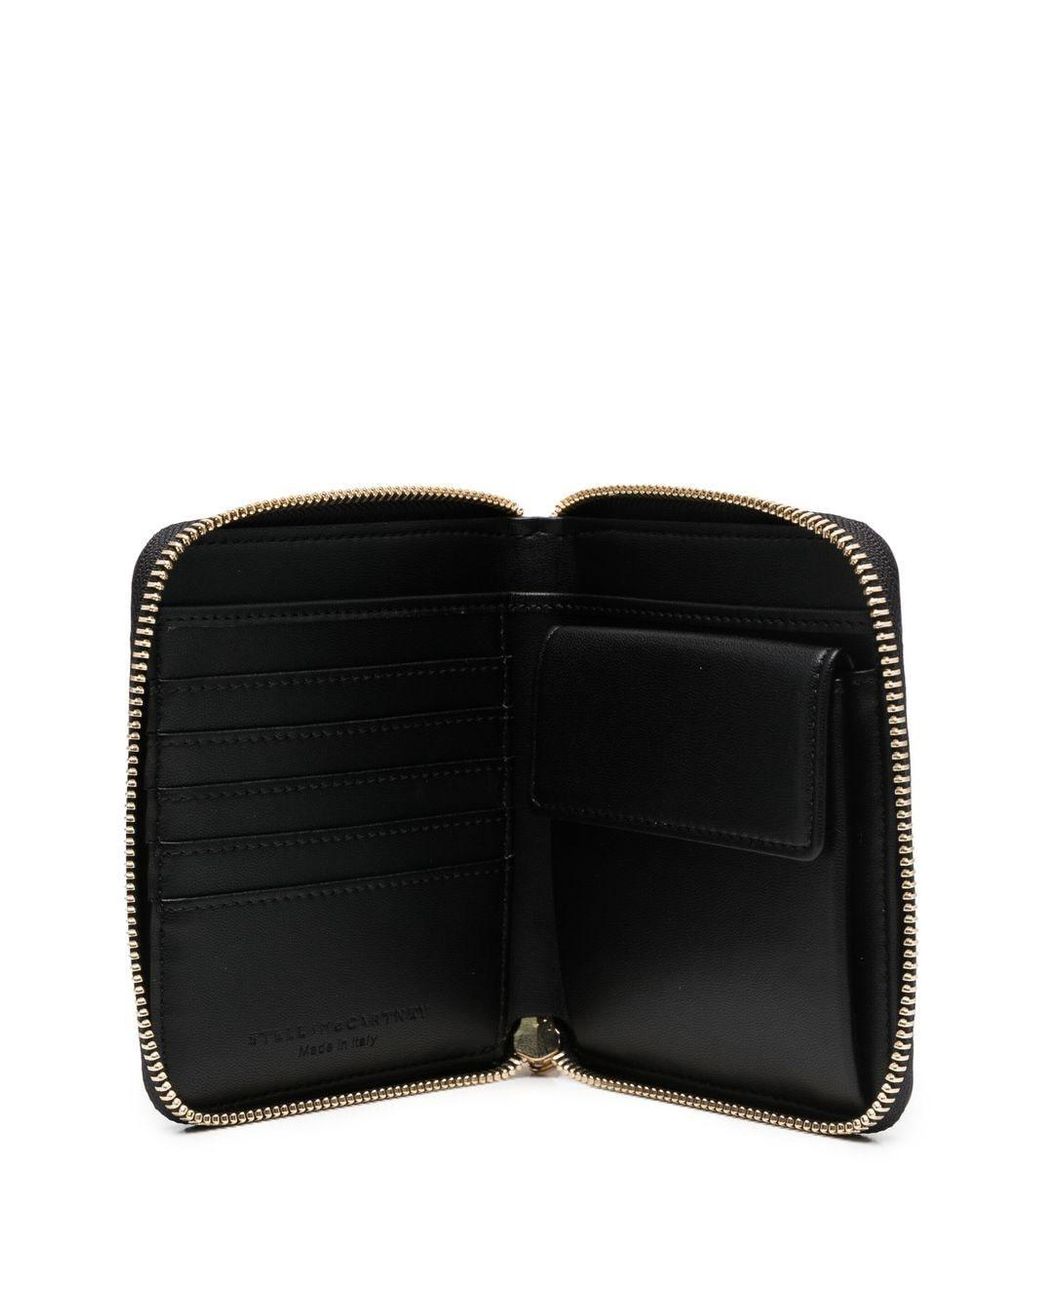 Womens Accessories Wallets and cardholders Save 21% Stella McCartney Bicolor Card Holder 